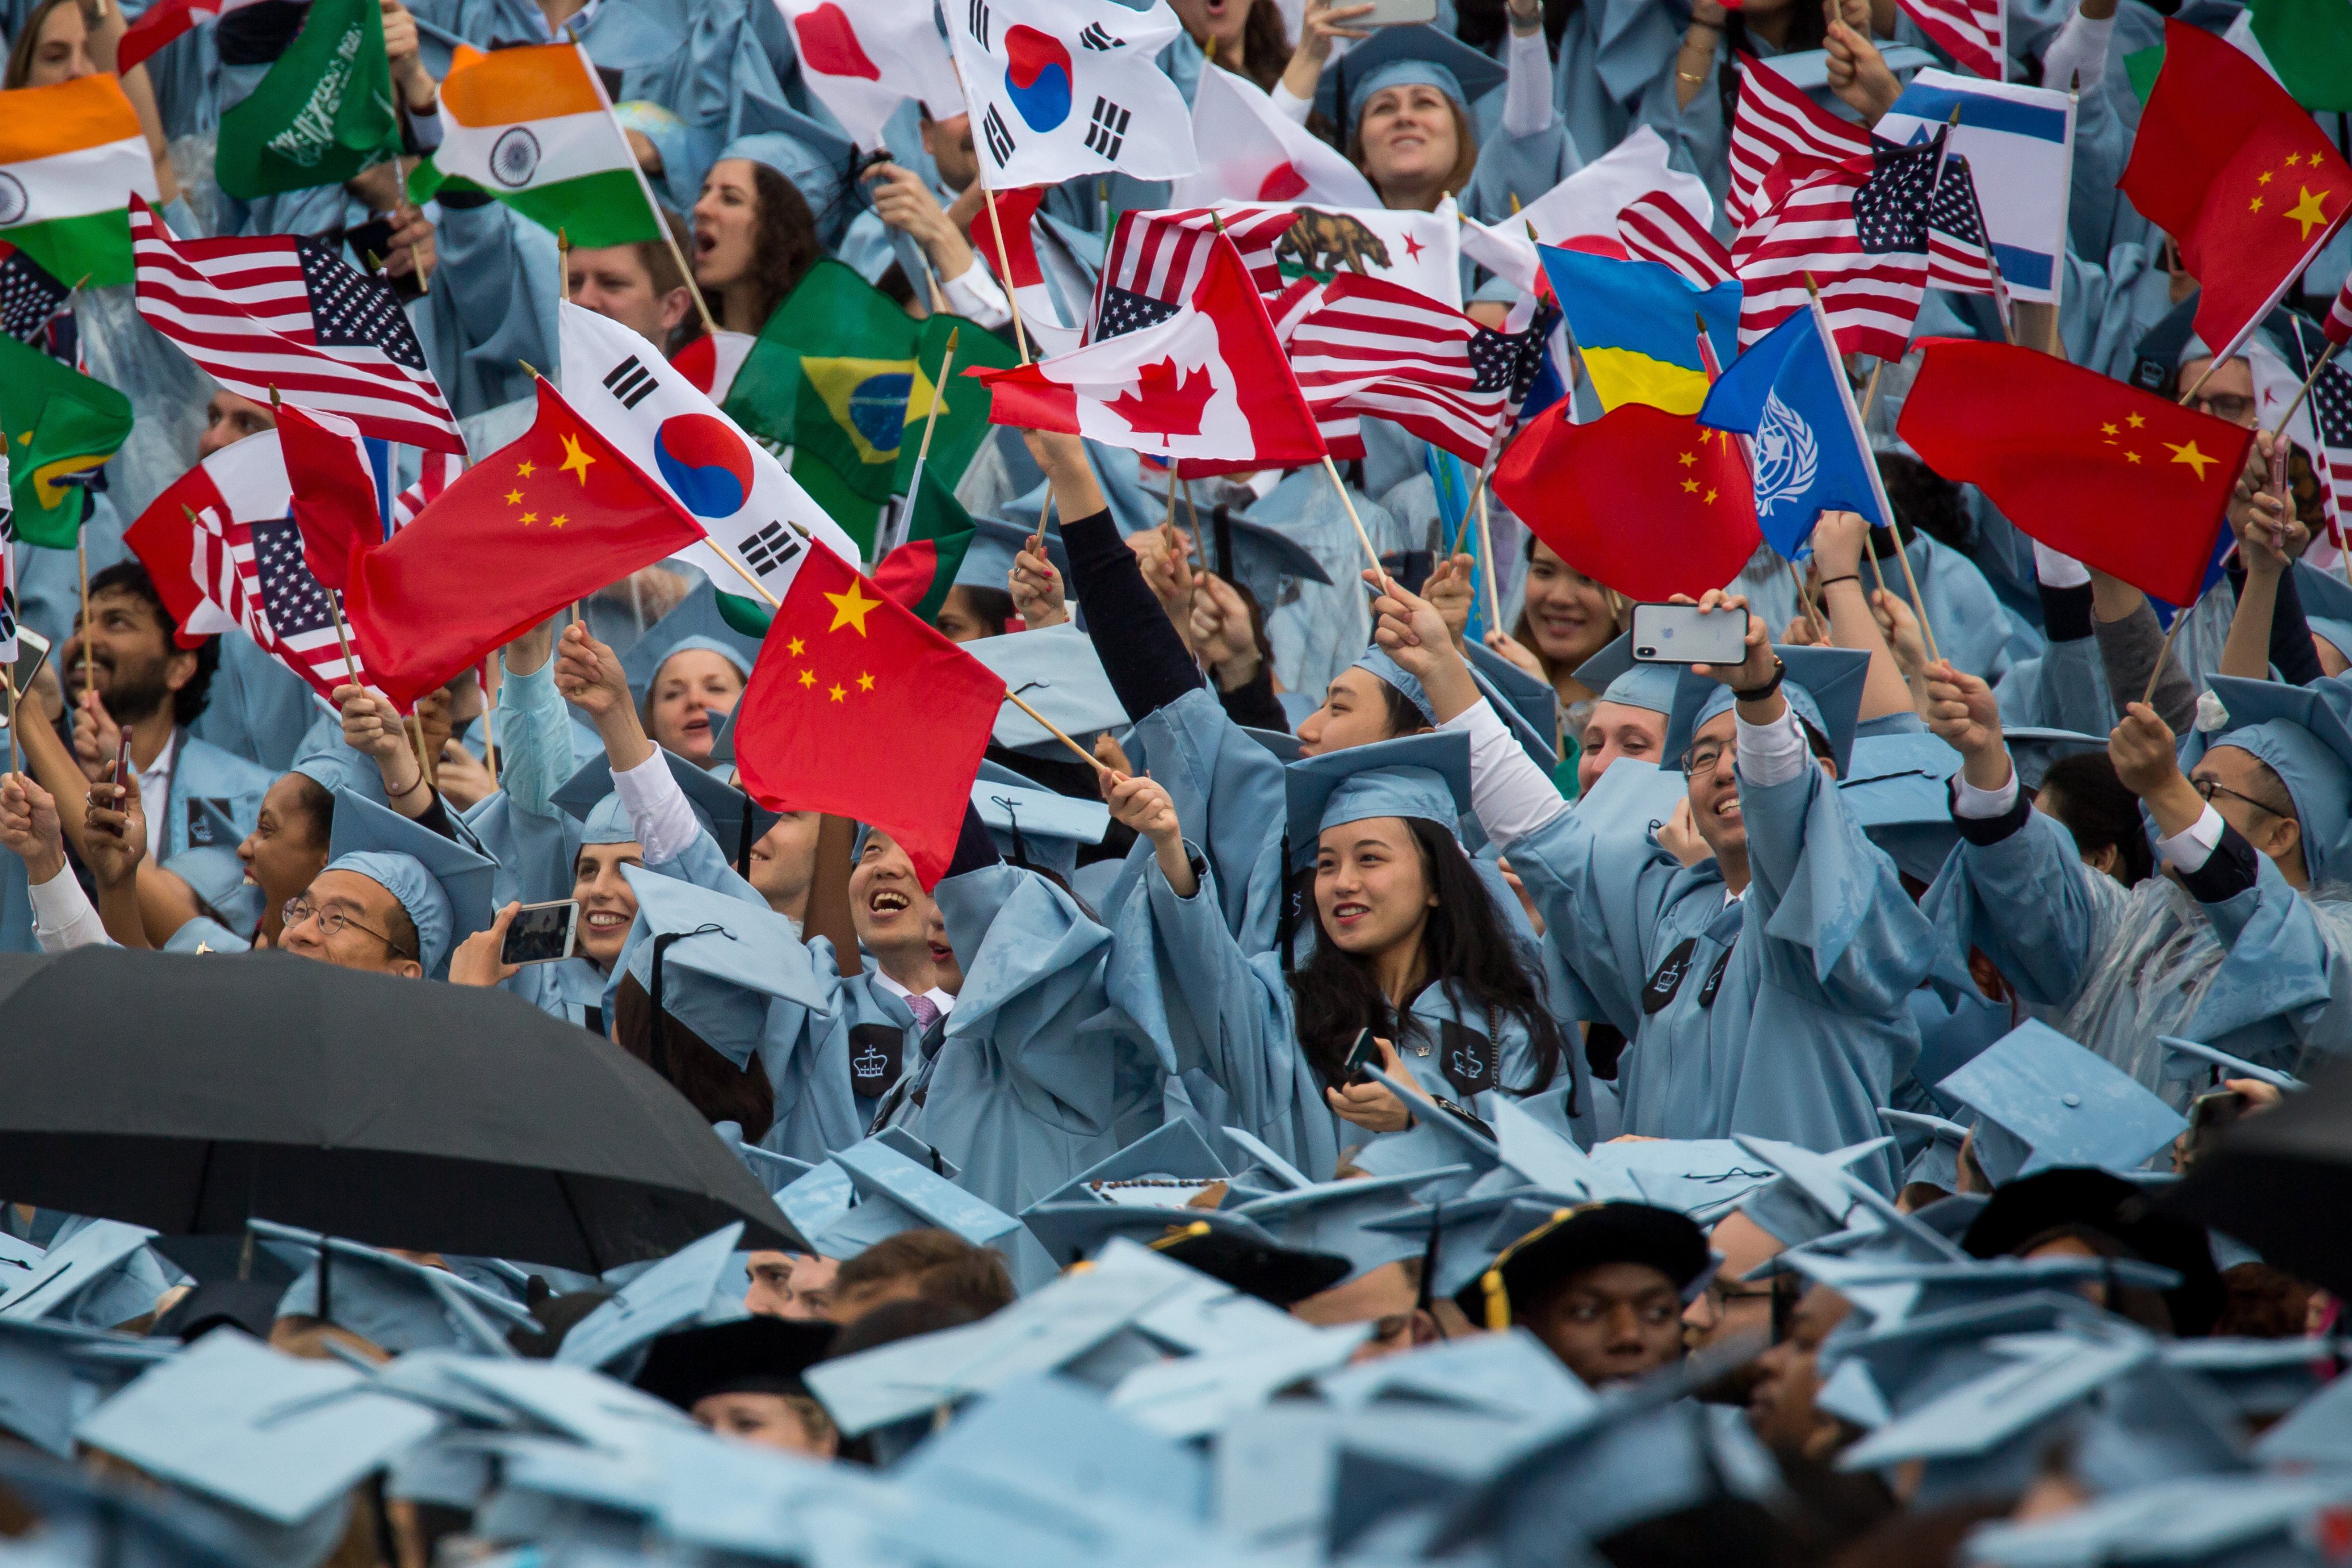 Graduates from the Columbia University in New York wave flags during their commencement ceremony on May 16, 2018. File photo: Xinhua